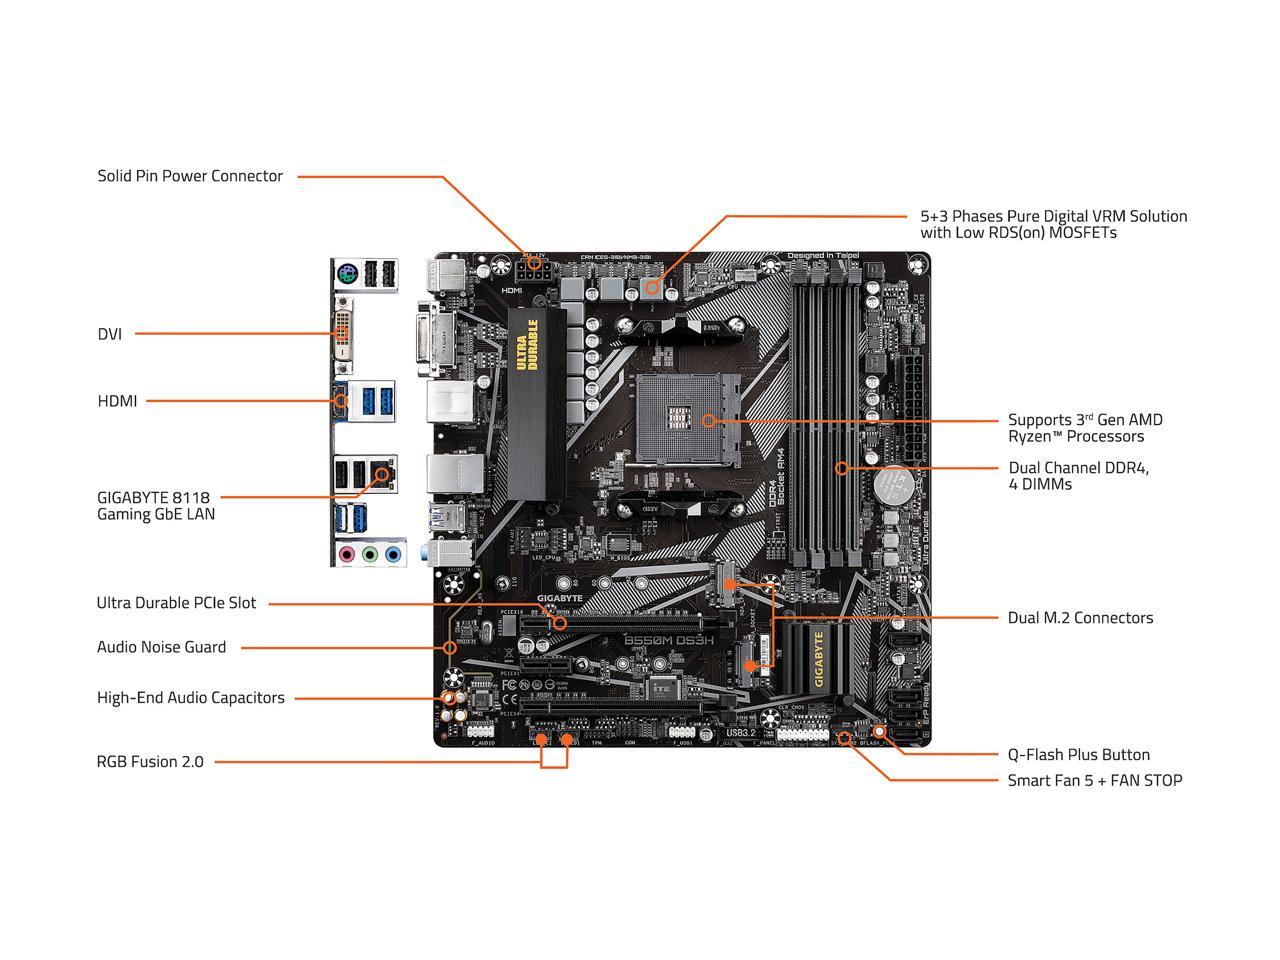 Gigabyte B550M DS3H Motherboard Reviewed at AMD3D - Funky Kit